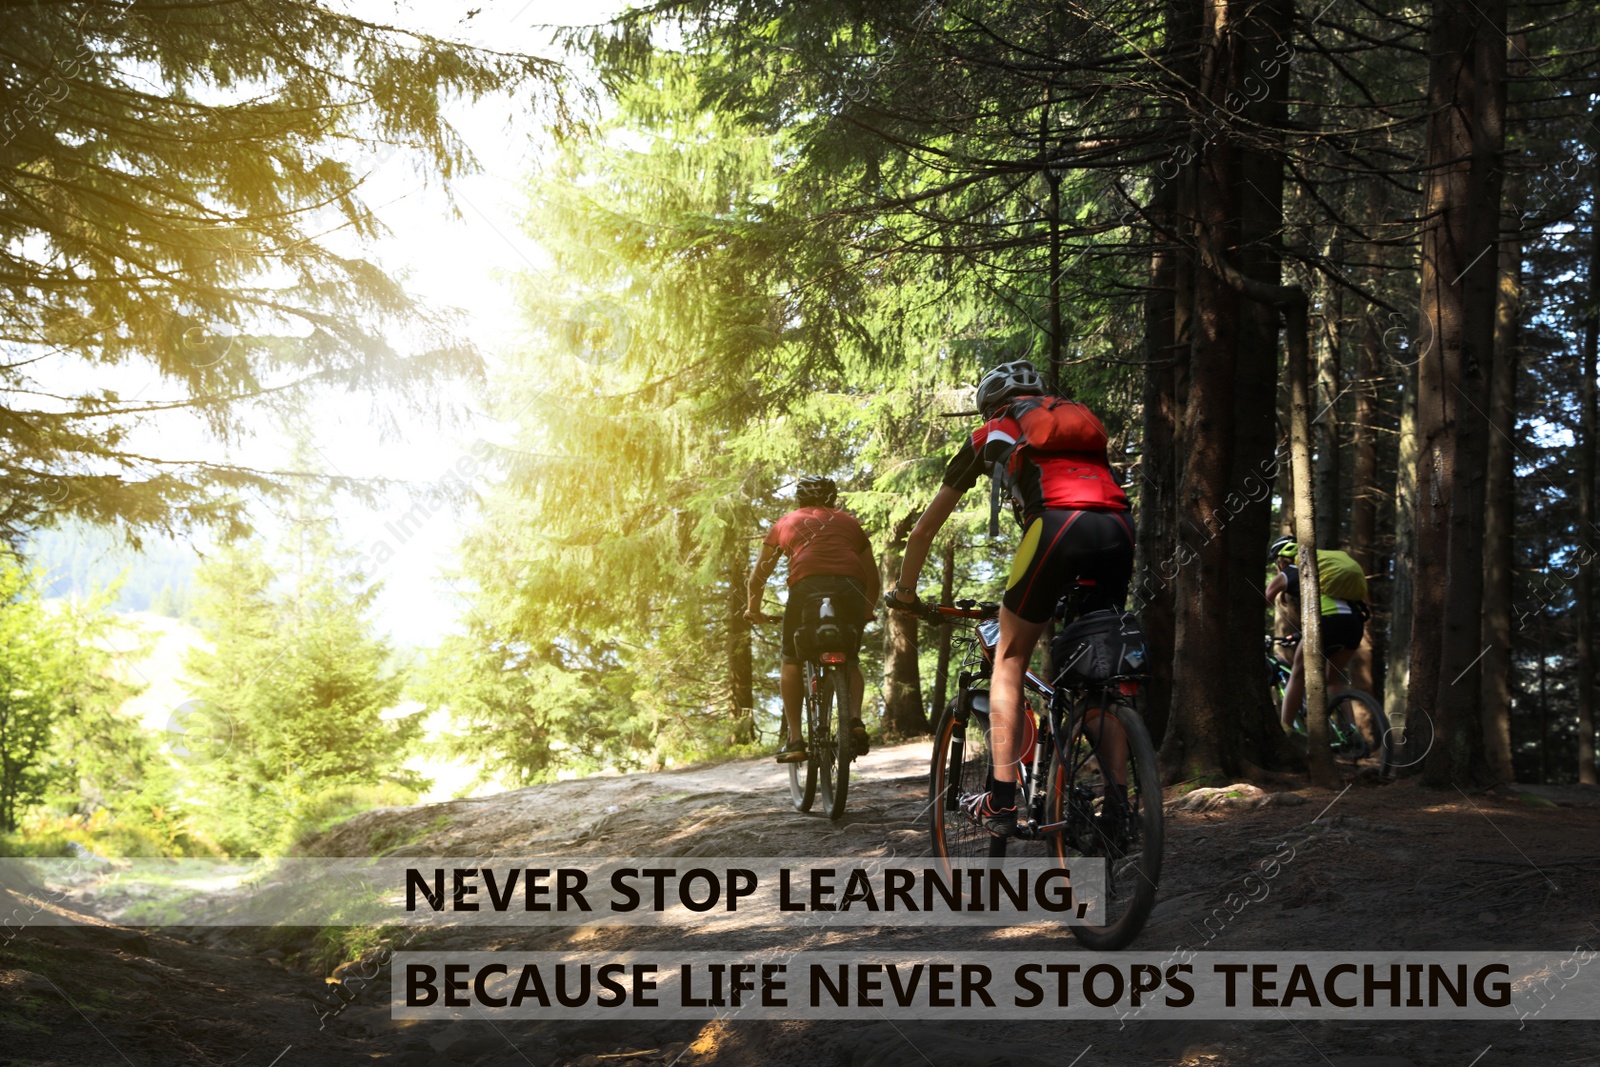 Image of Never Stop Learning, Because Life Never Stops Teaching. Motivational quote saying that knowledge comes from everywhere every day. Text against view of cyclist riding bicycles down forest trail